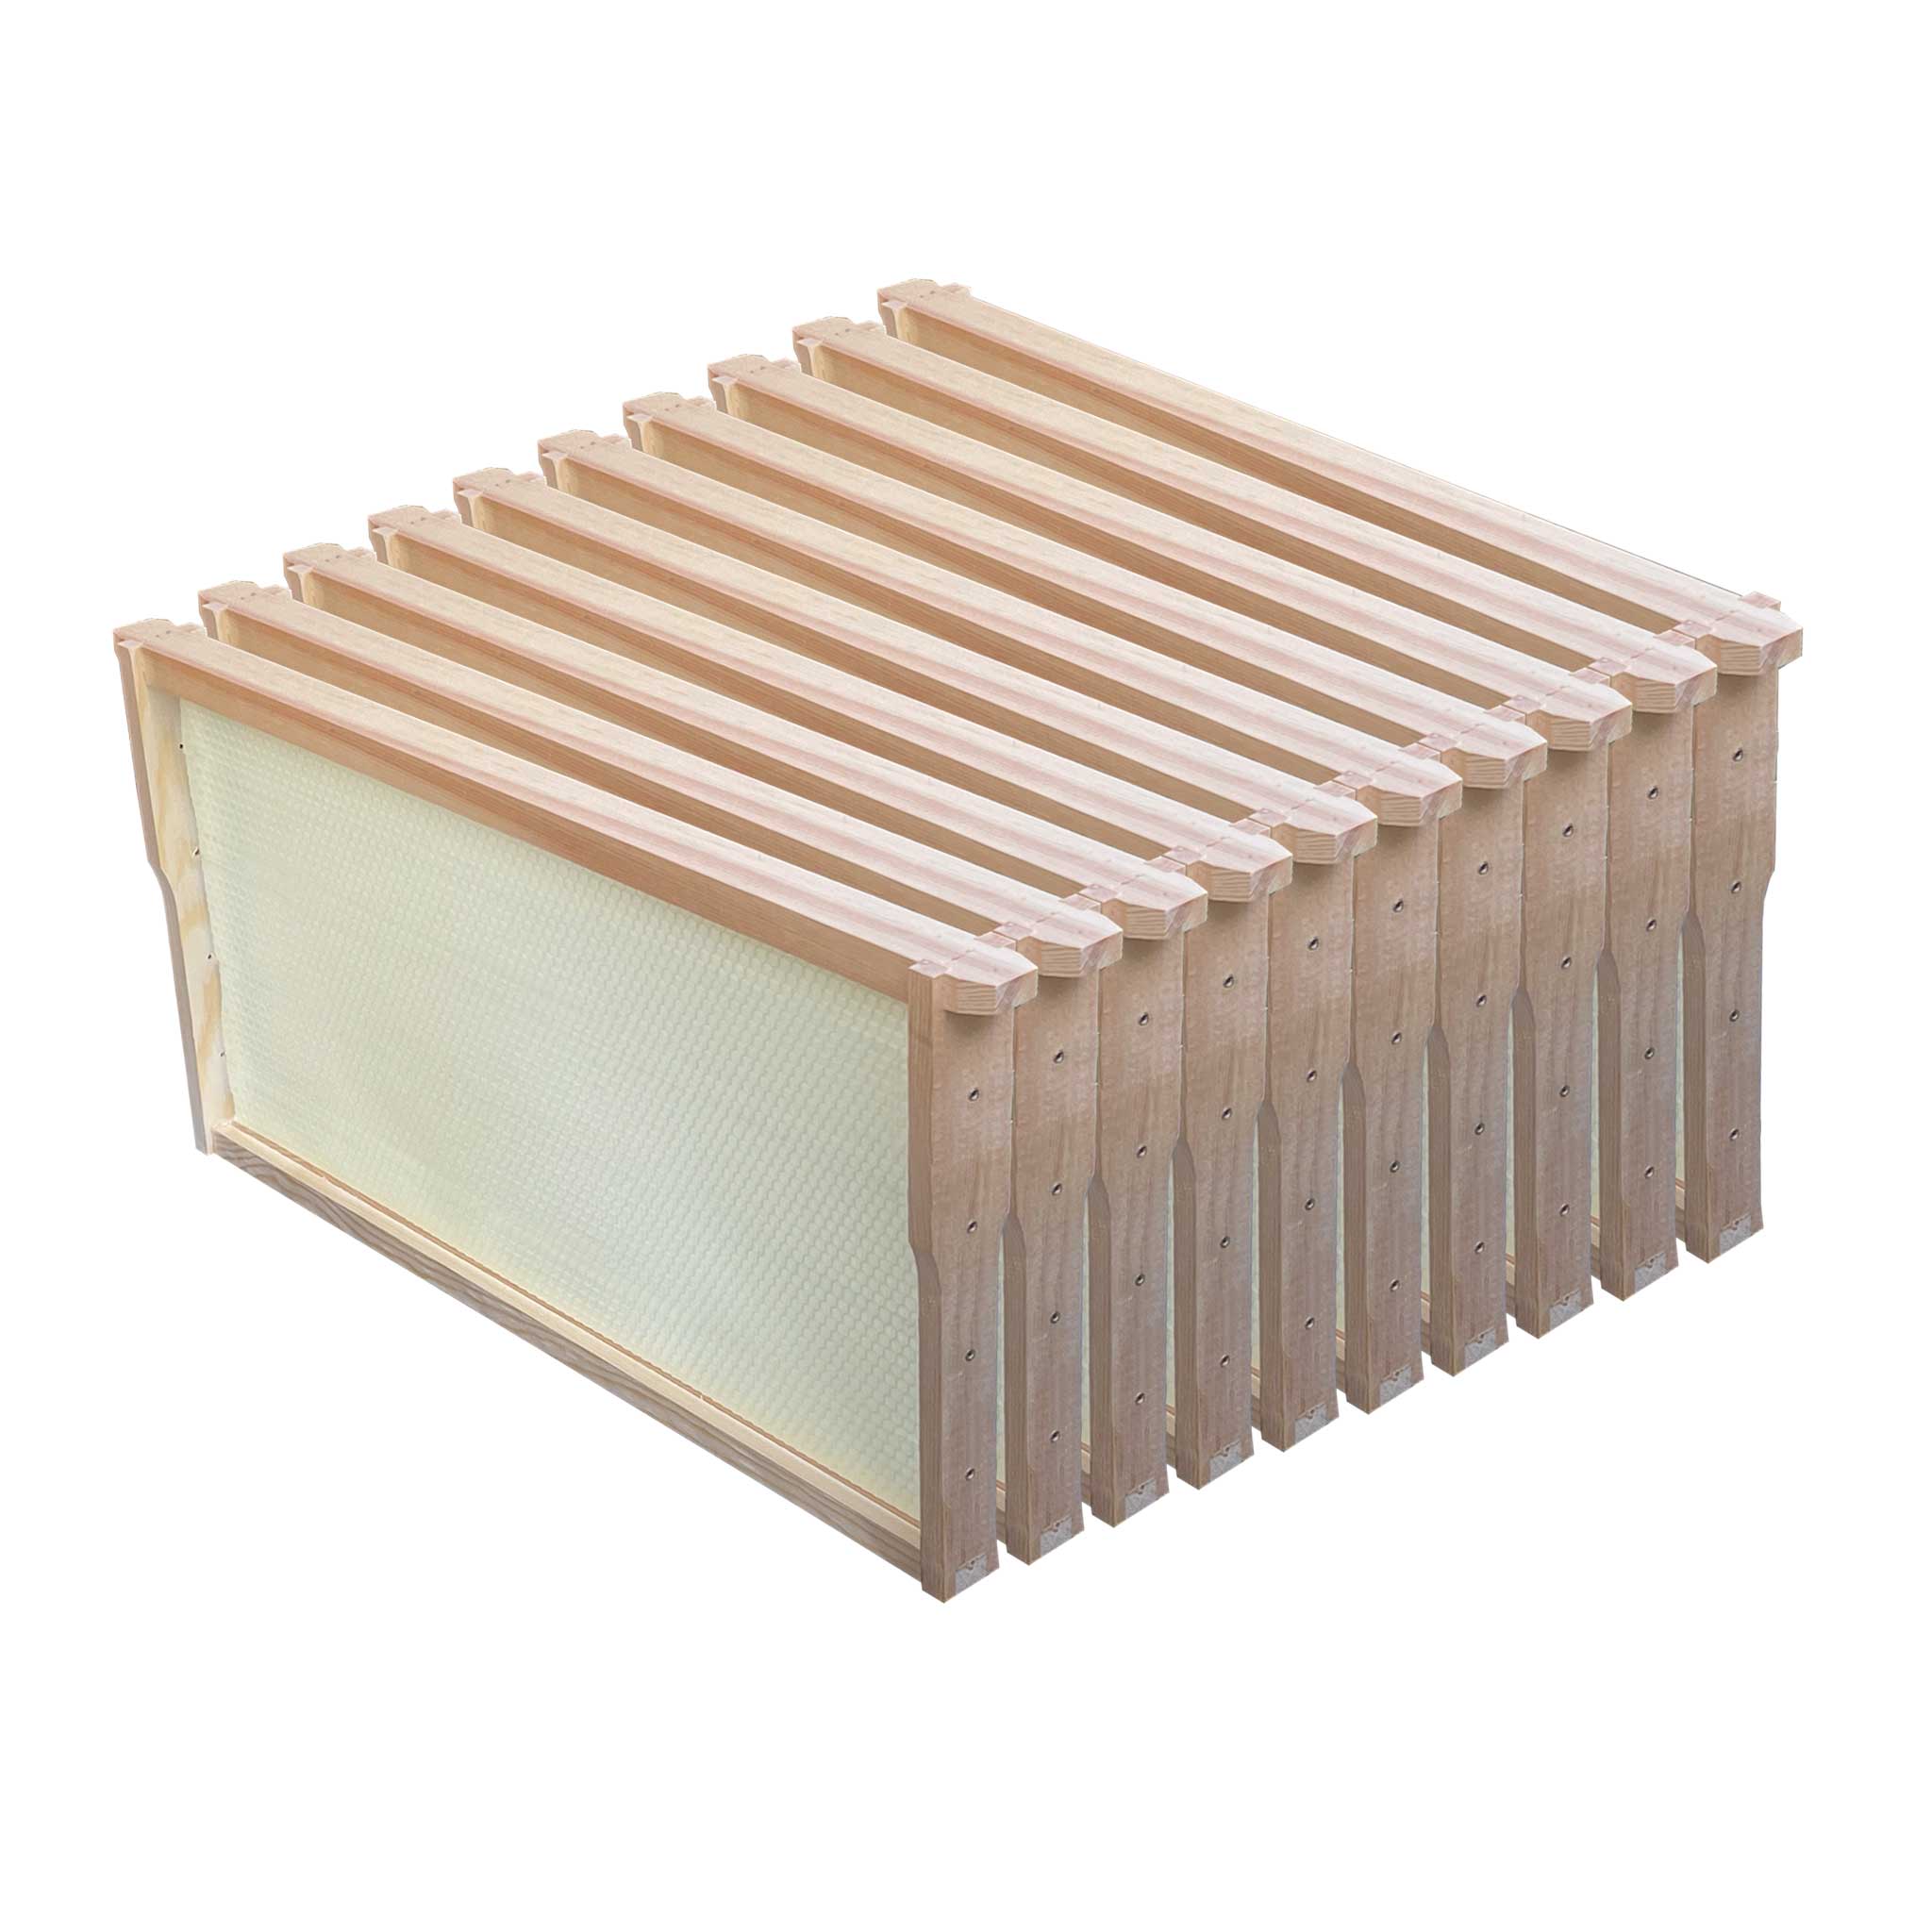 Beekeeping Deep Frame Kits - Hive Parts collection by Buzzbee Beekeeping Supplies